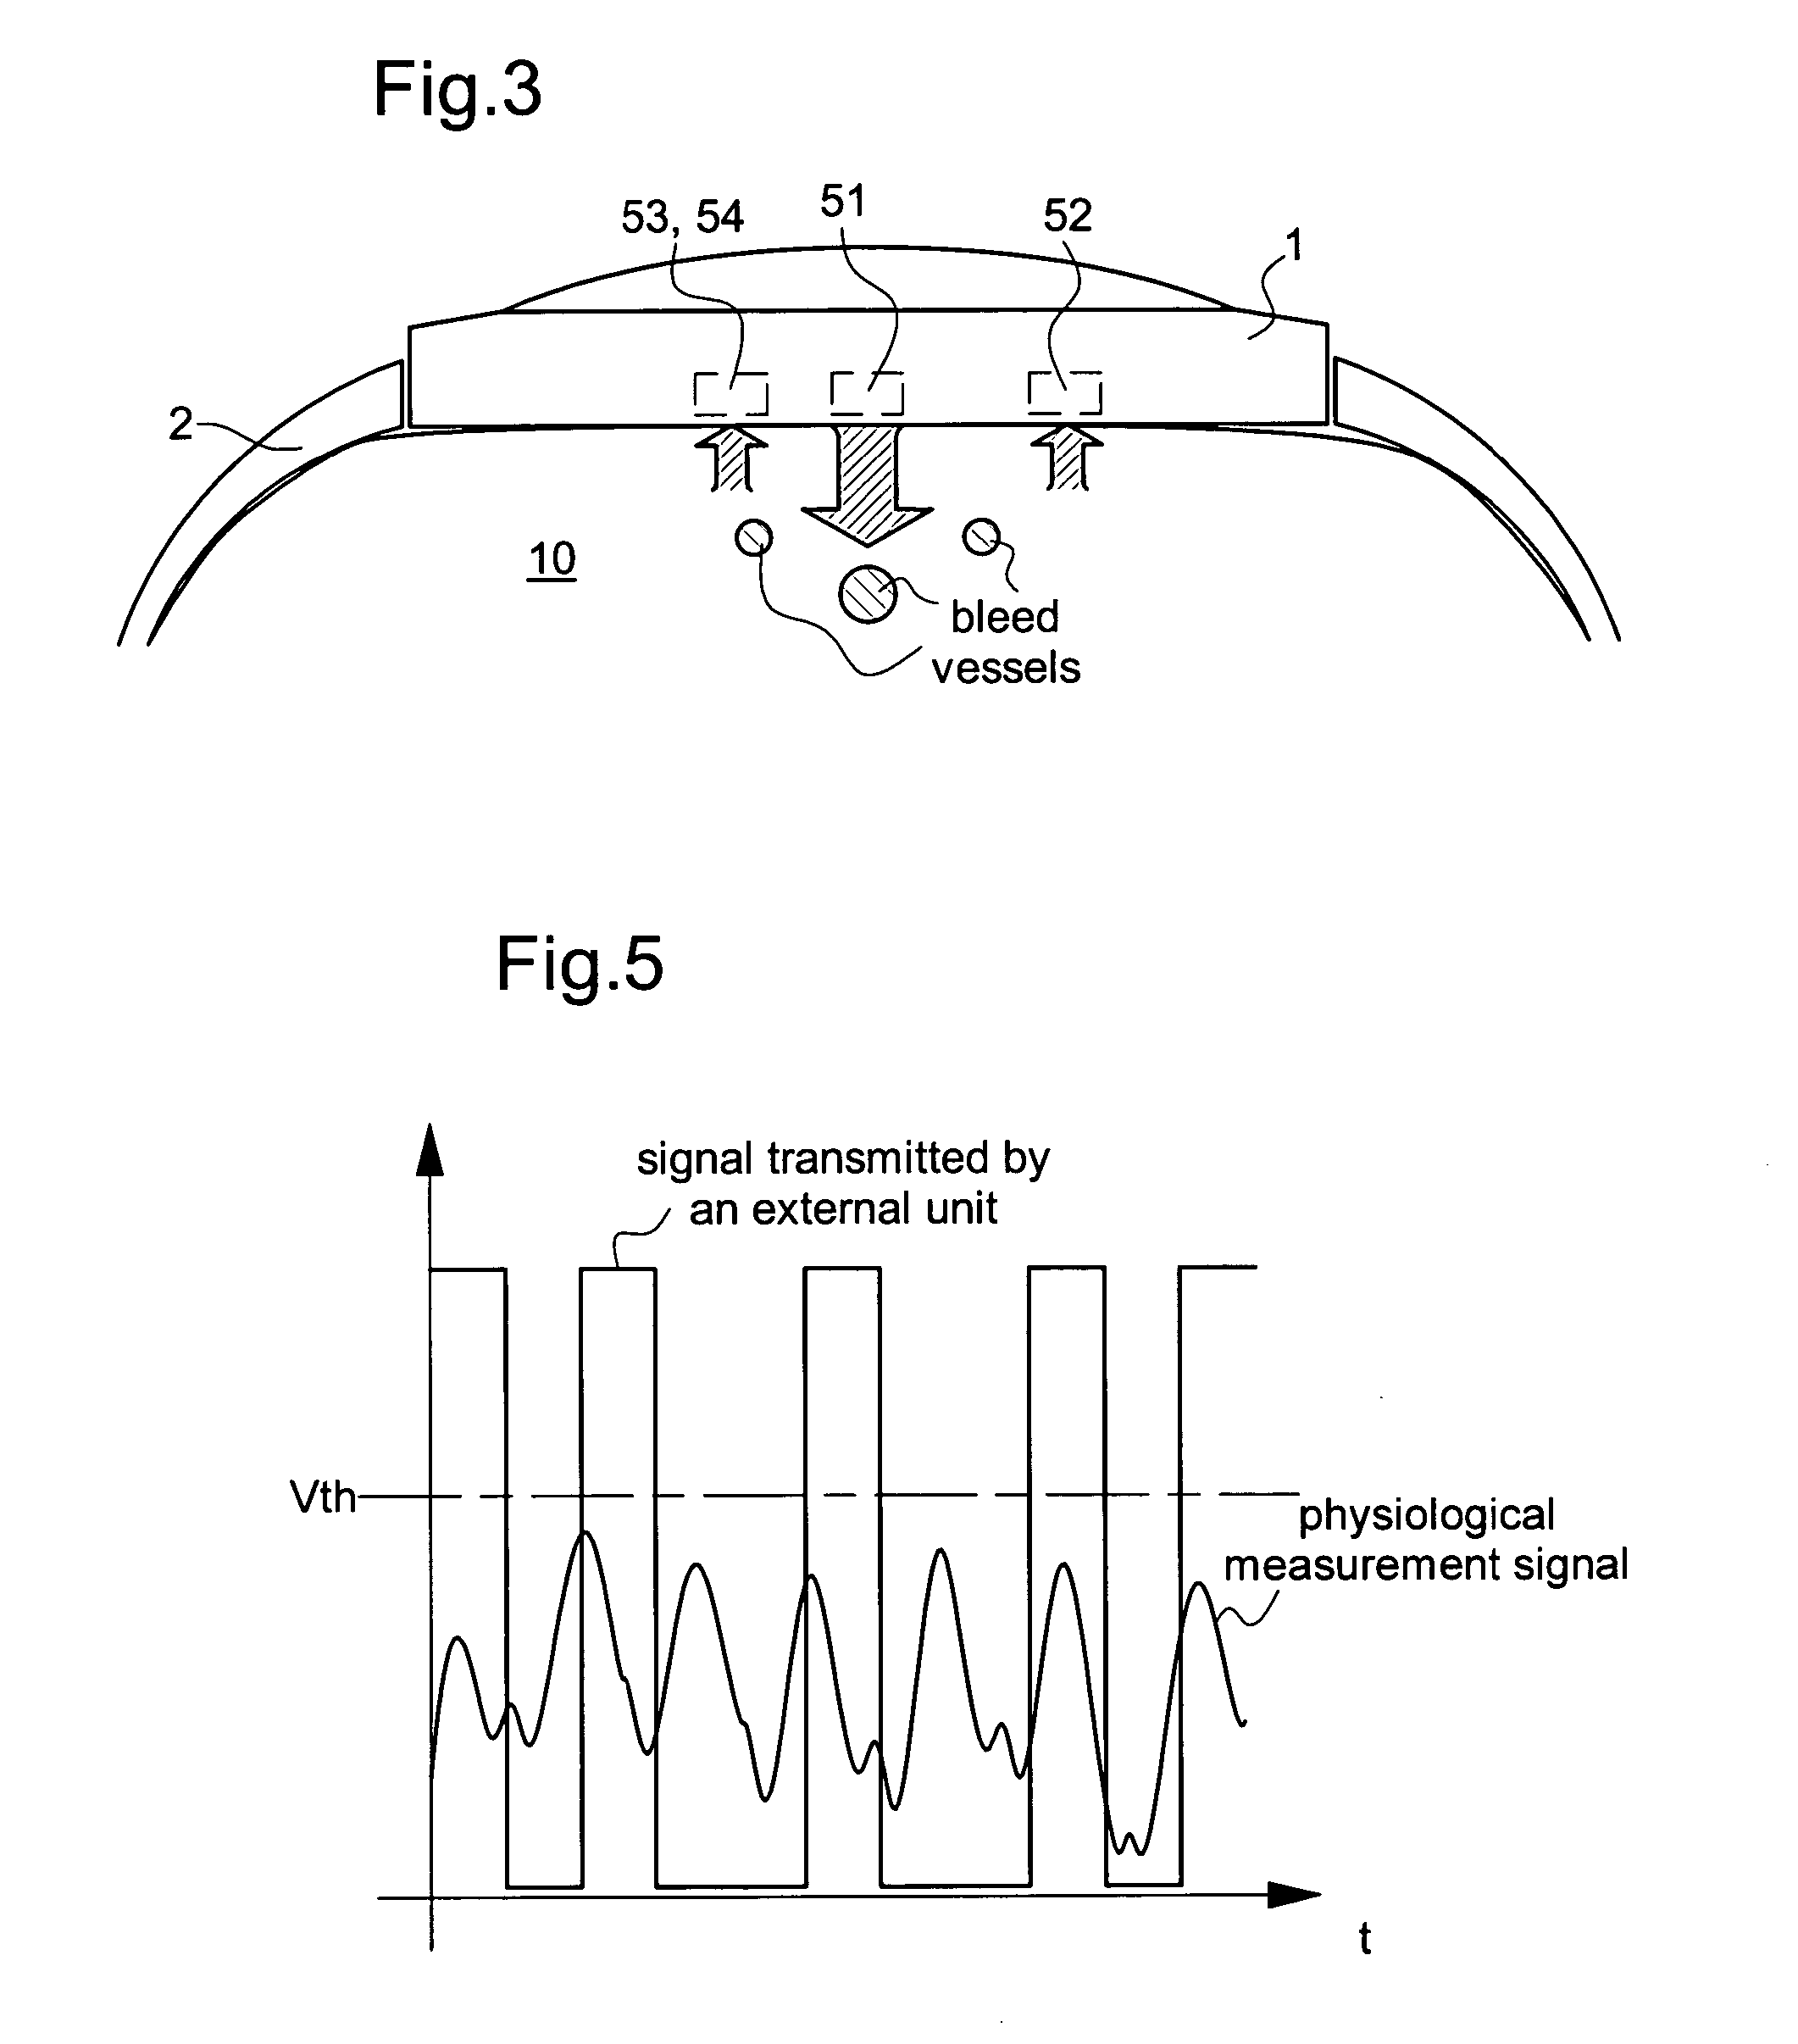 Portable instrument provided with an optical device for measuring a physiological quantity and means for transmitting and/or receiving data